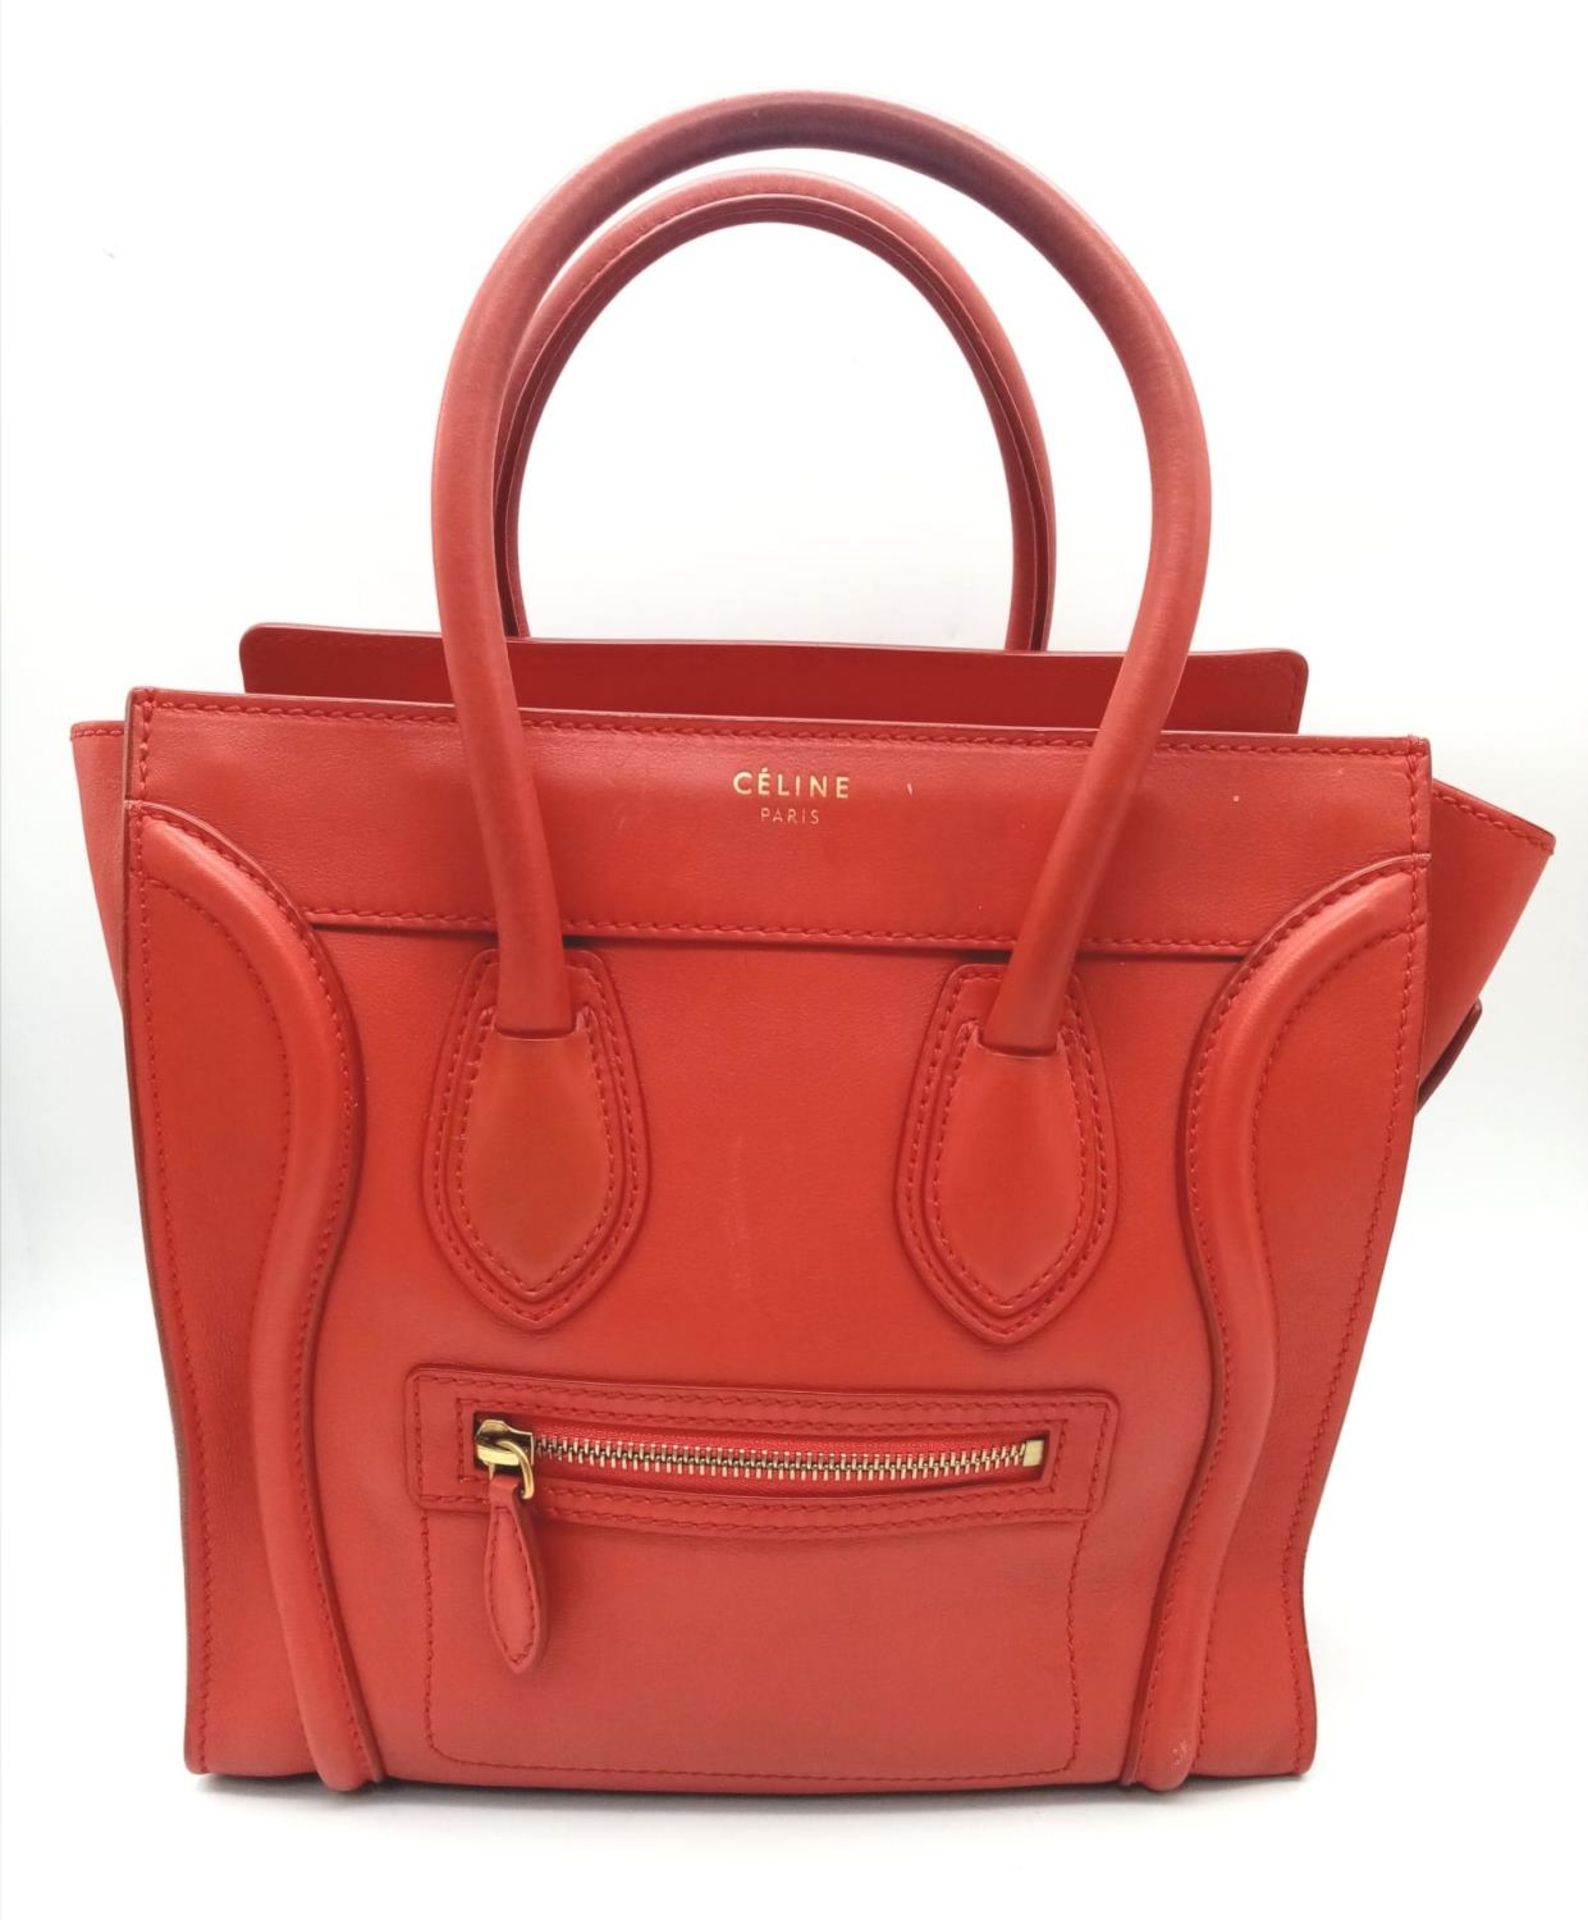 A Celine Coral Luggage Bag. Leather exterior with two rolled leather handles, a zipped pocket to the